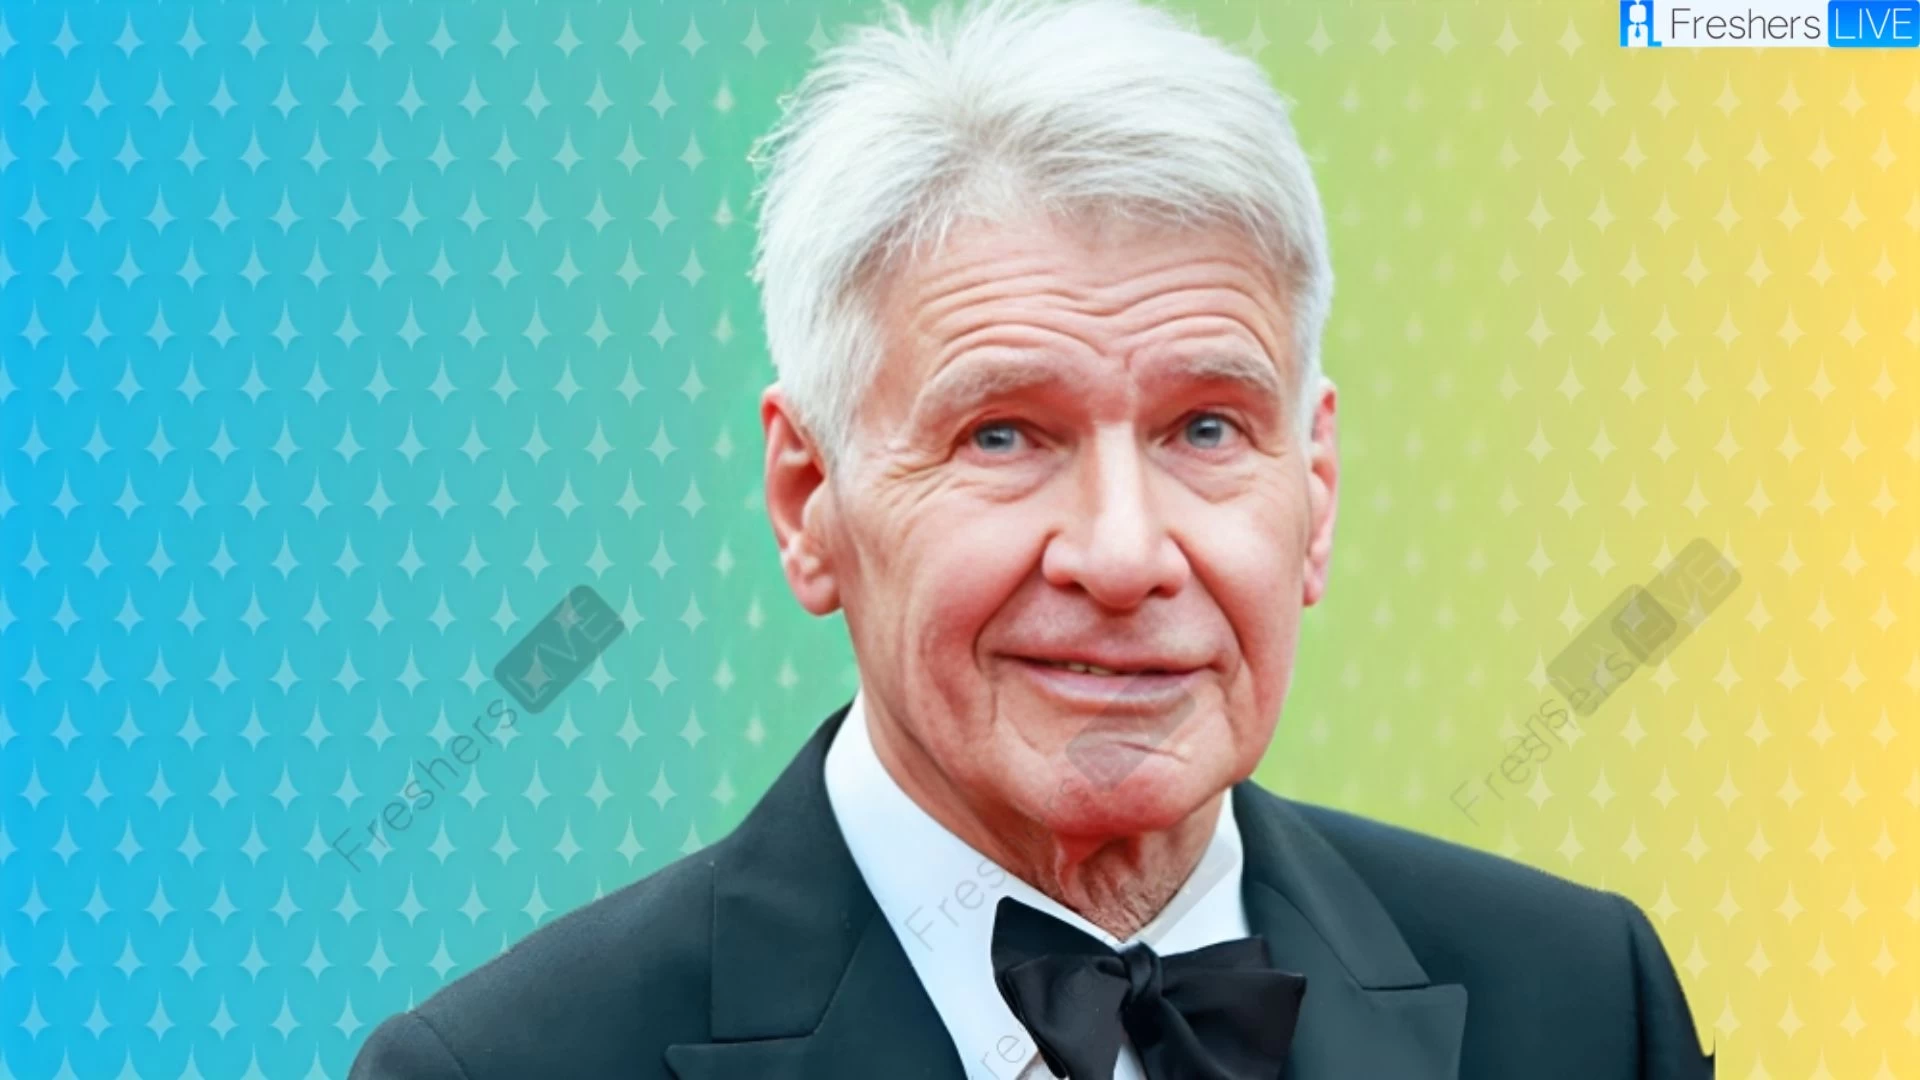 Harrison Ford Religion What Religion is Harrison Ford? Is Harrison Ford a Agnostic?